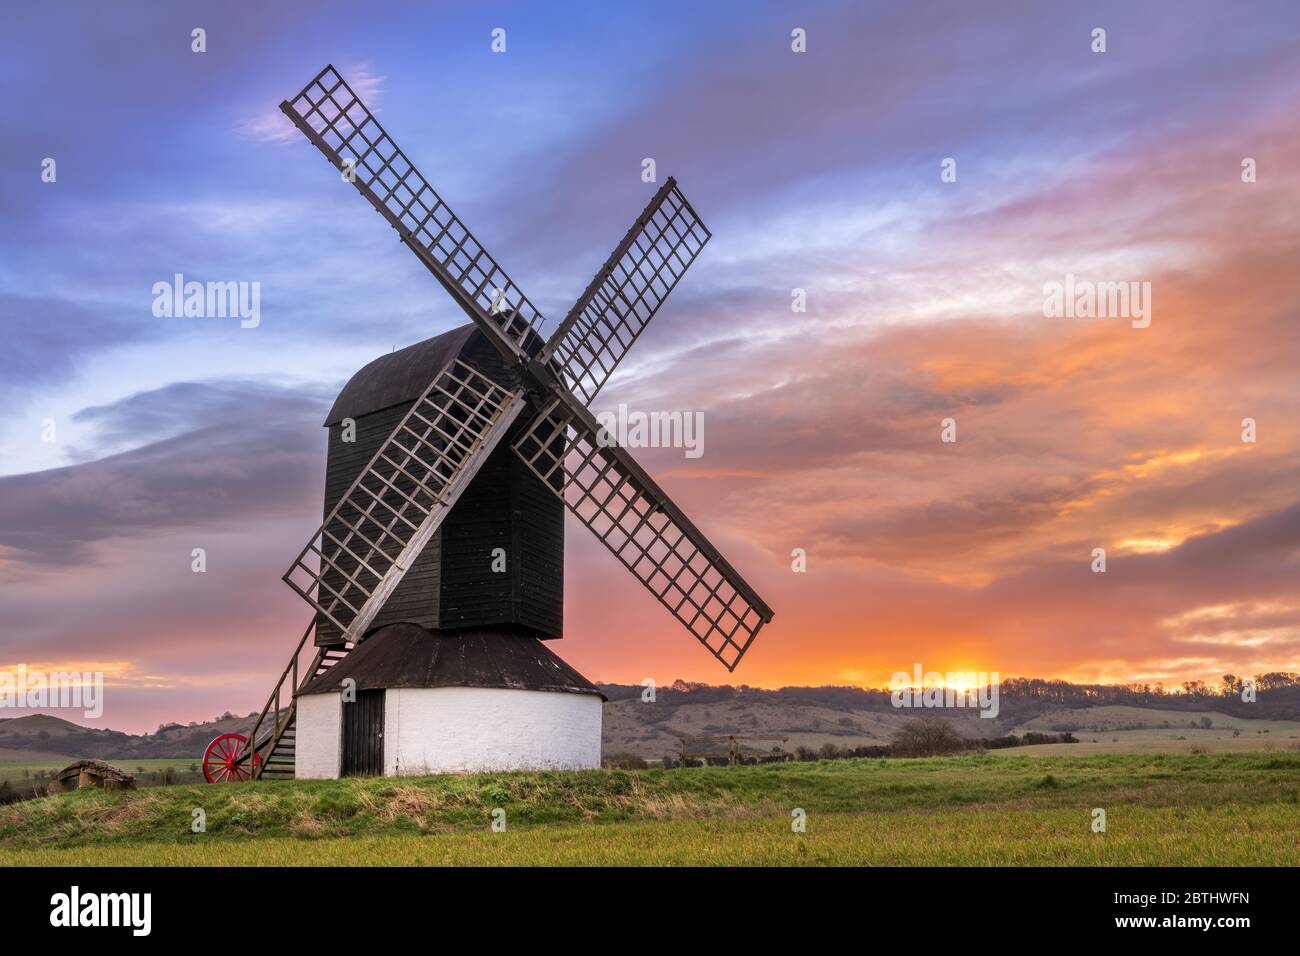 After a cold night, the dawn sky is spectacular over the Pitstone Windmill in Ivinghoe, Buckinghamshire, on the Ridgeway National Trail. Stock Photo